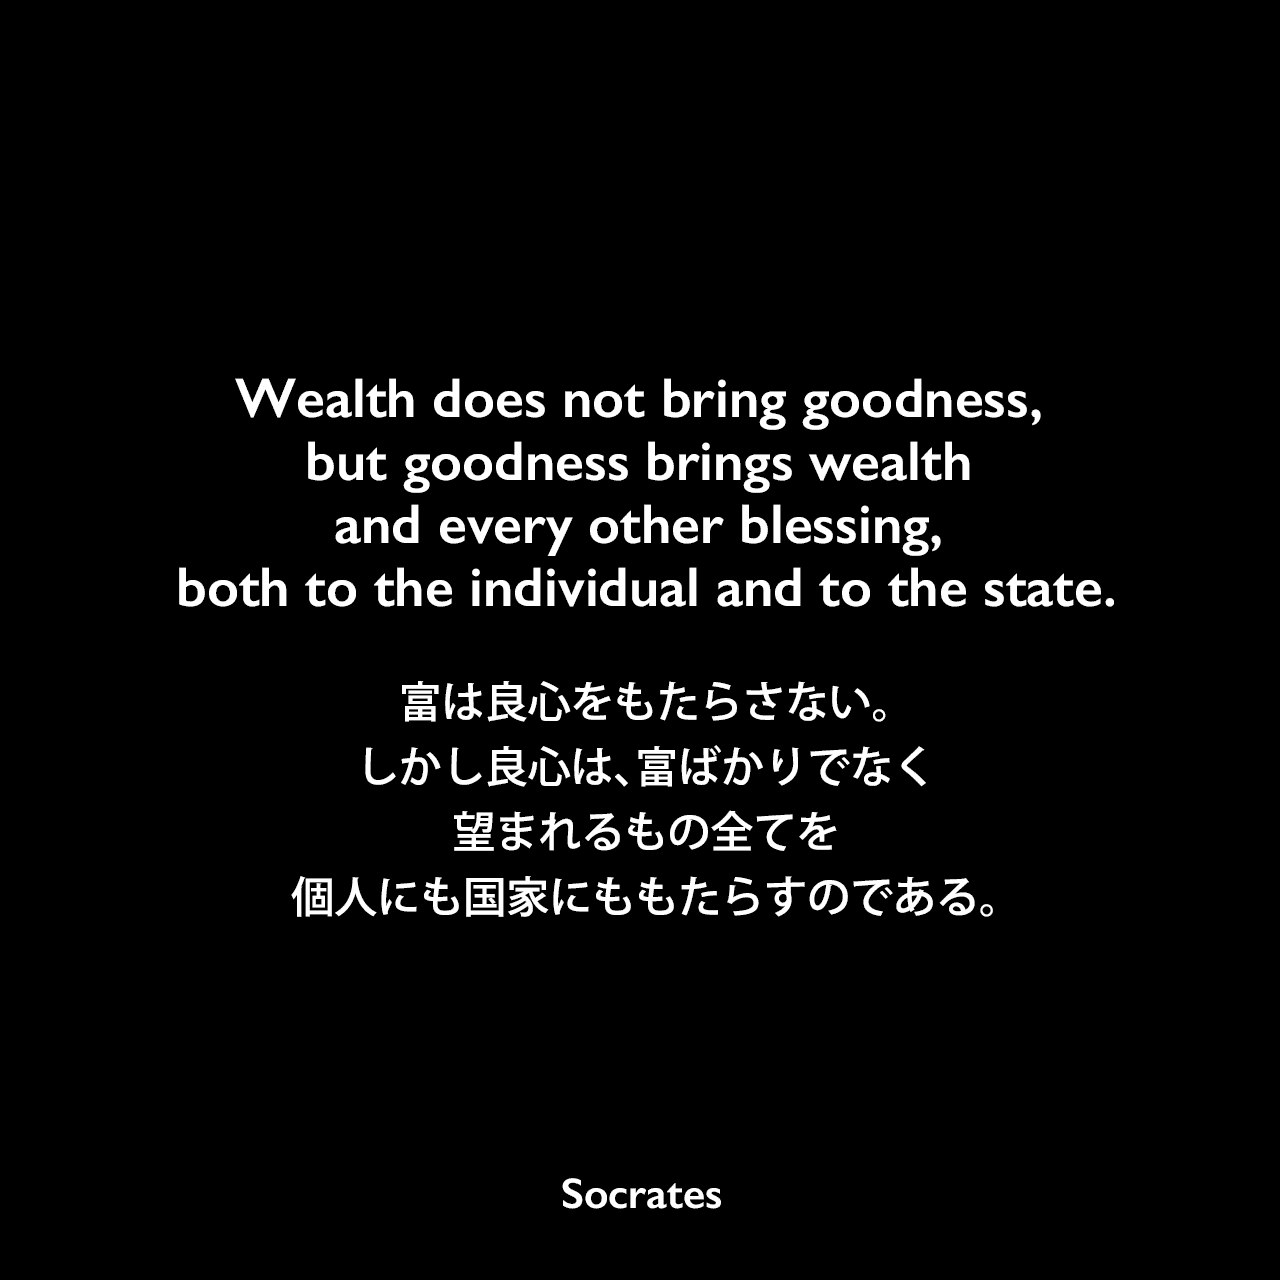 Wealth does not bring goodness, but goodness brings wealth and every other blessing, both to the individual and to the state.富は良心をもたらさない。しかし良心は、富ばかりでなく、望まれるもの全てを、個人にも国家にももたらすのである。Socrates